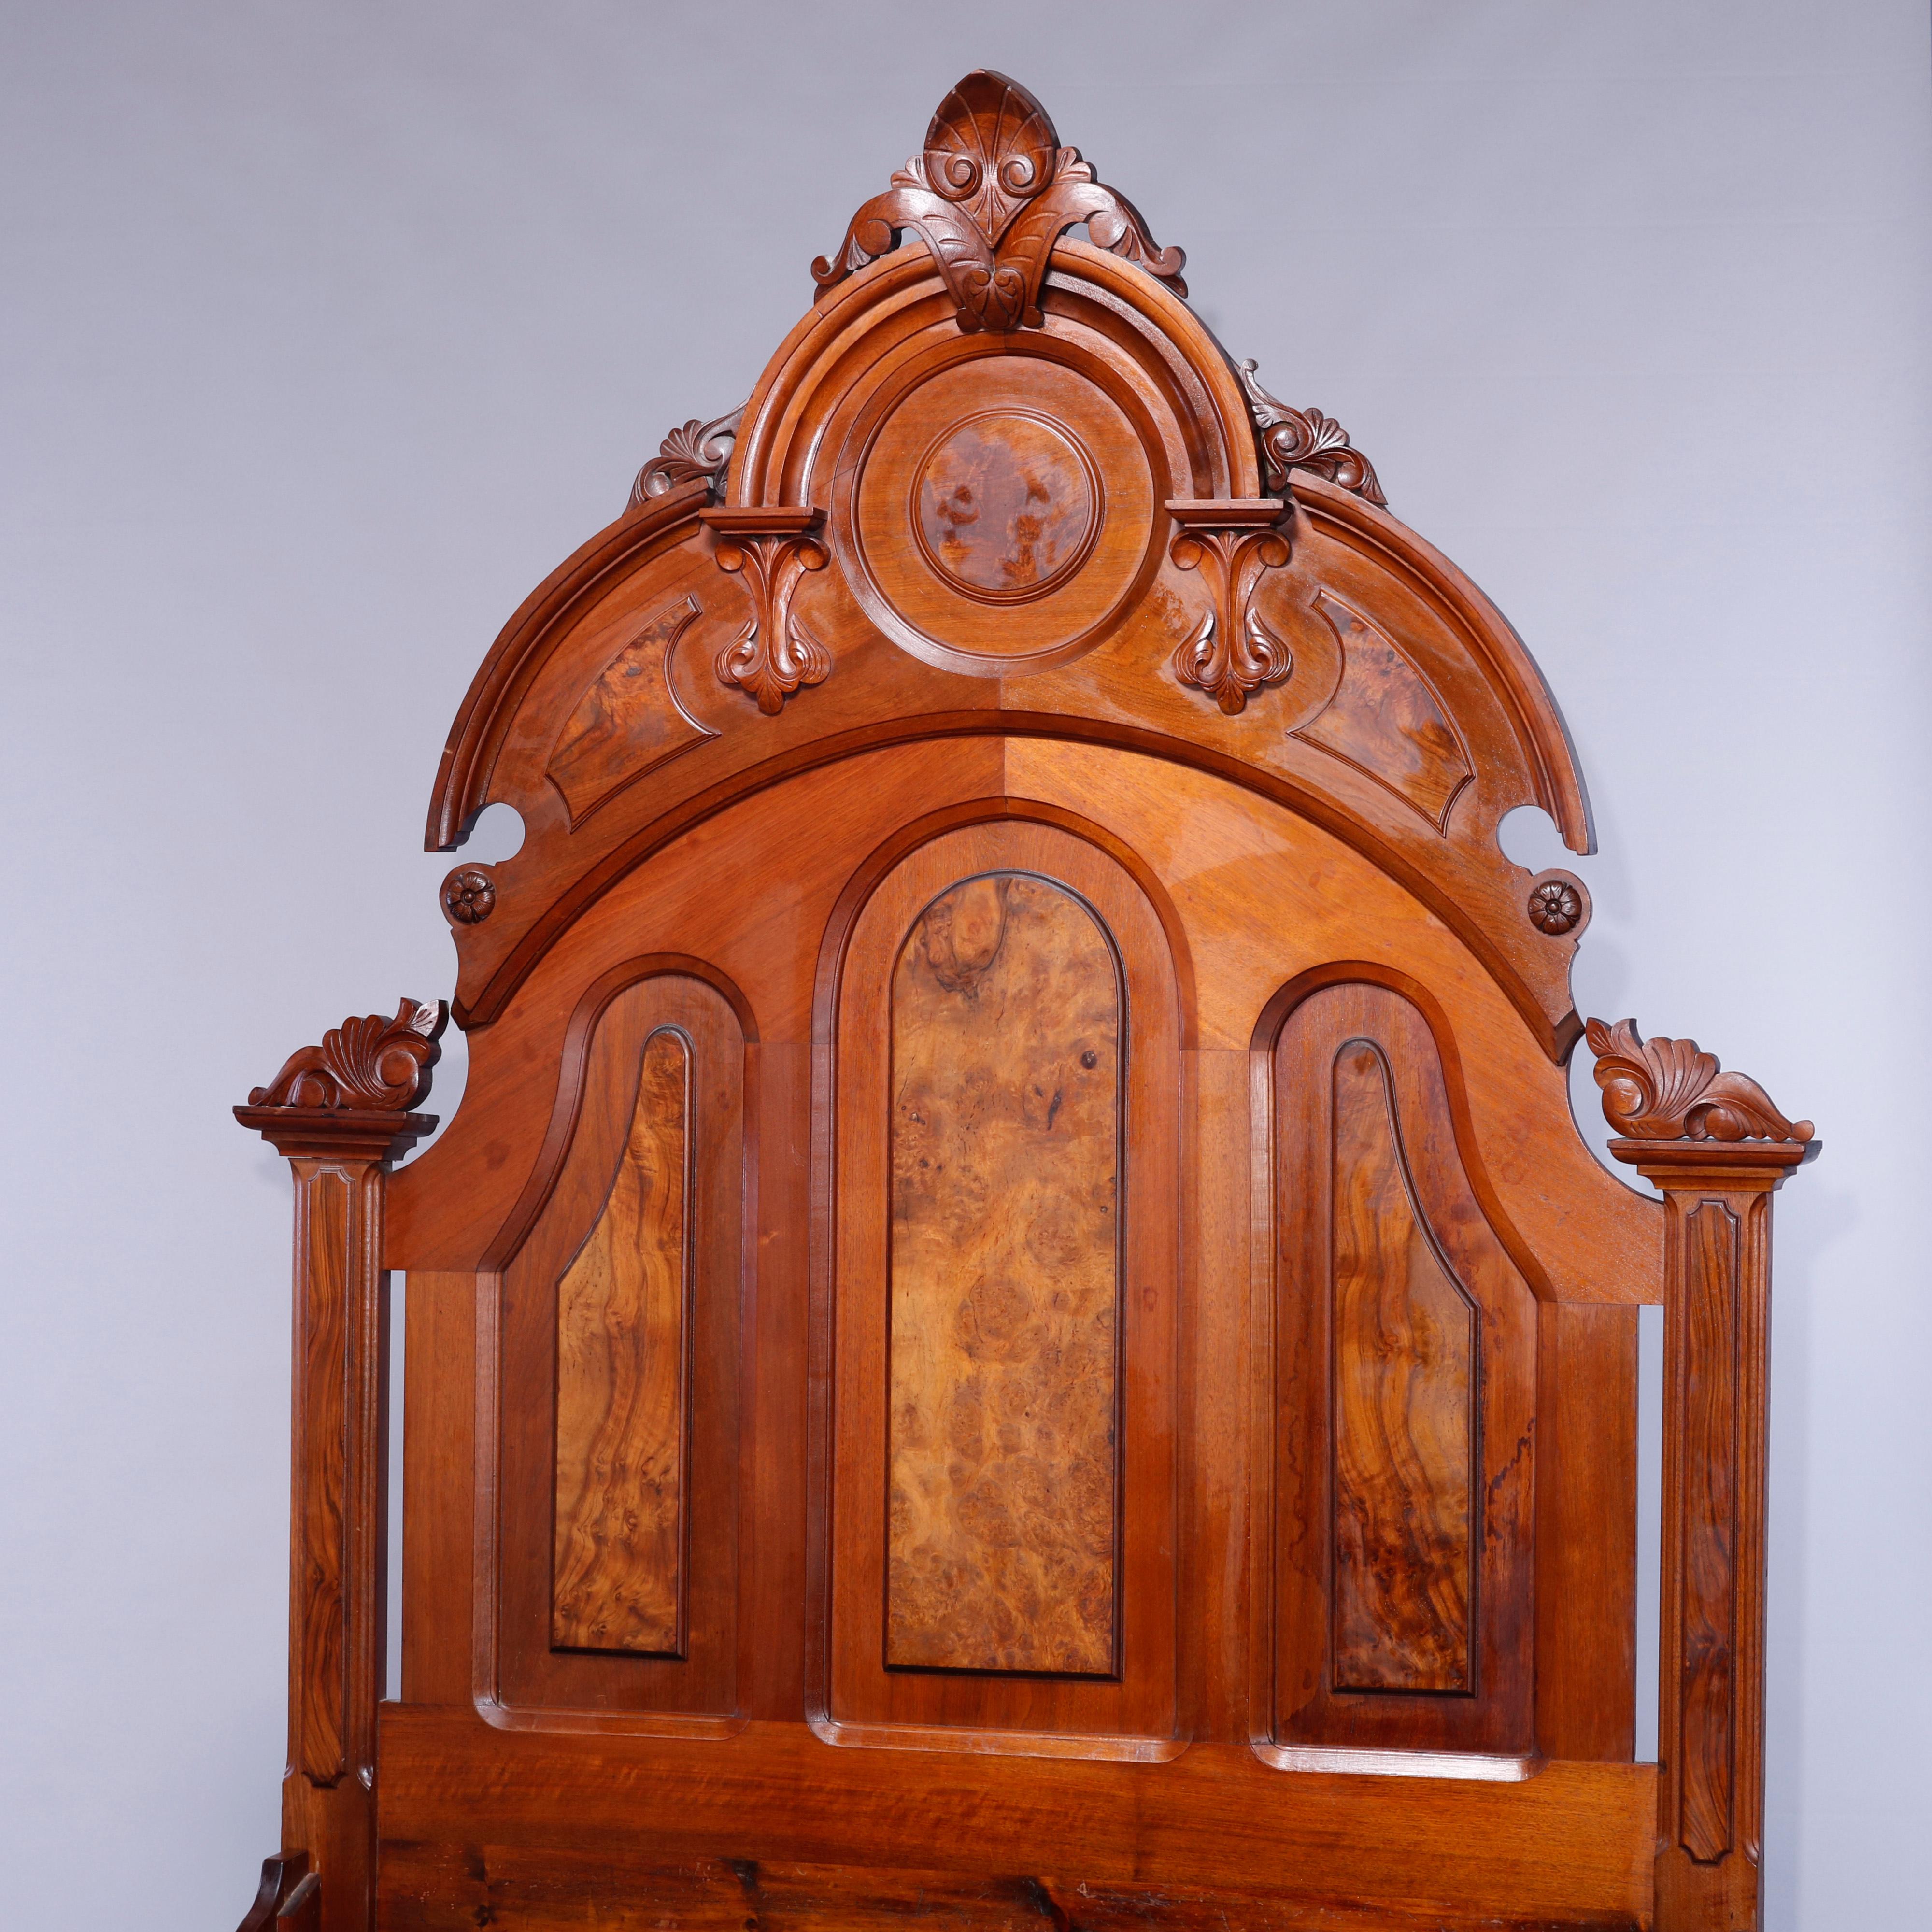 An antique Renaissance Revival full (or double) bed frame offers walnut and burl paneled construction with headboard having shaped crest with carved cartouche having flanking foliate elements, frame accepts full or double box spring and mattress